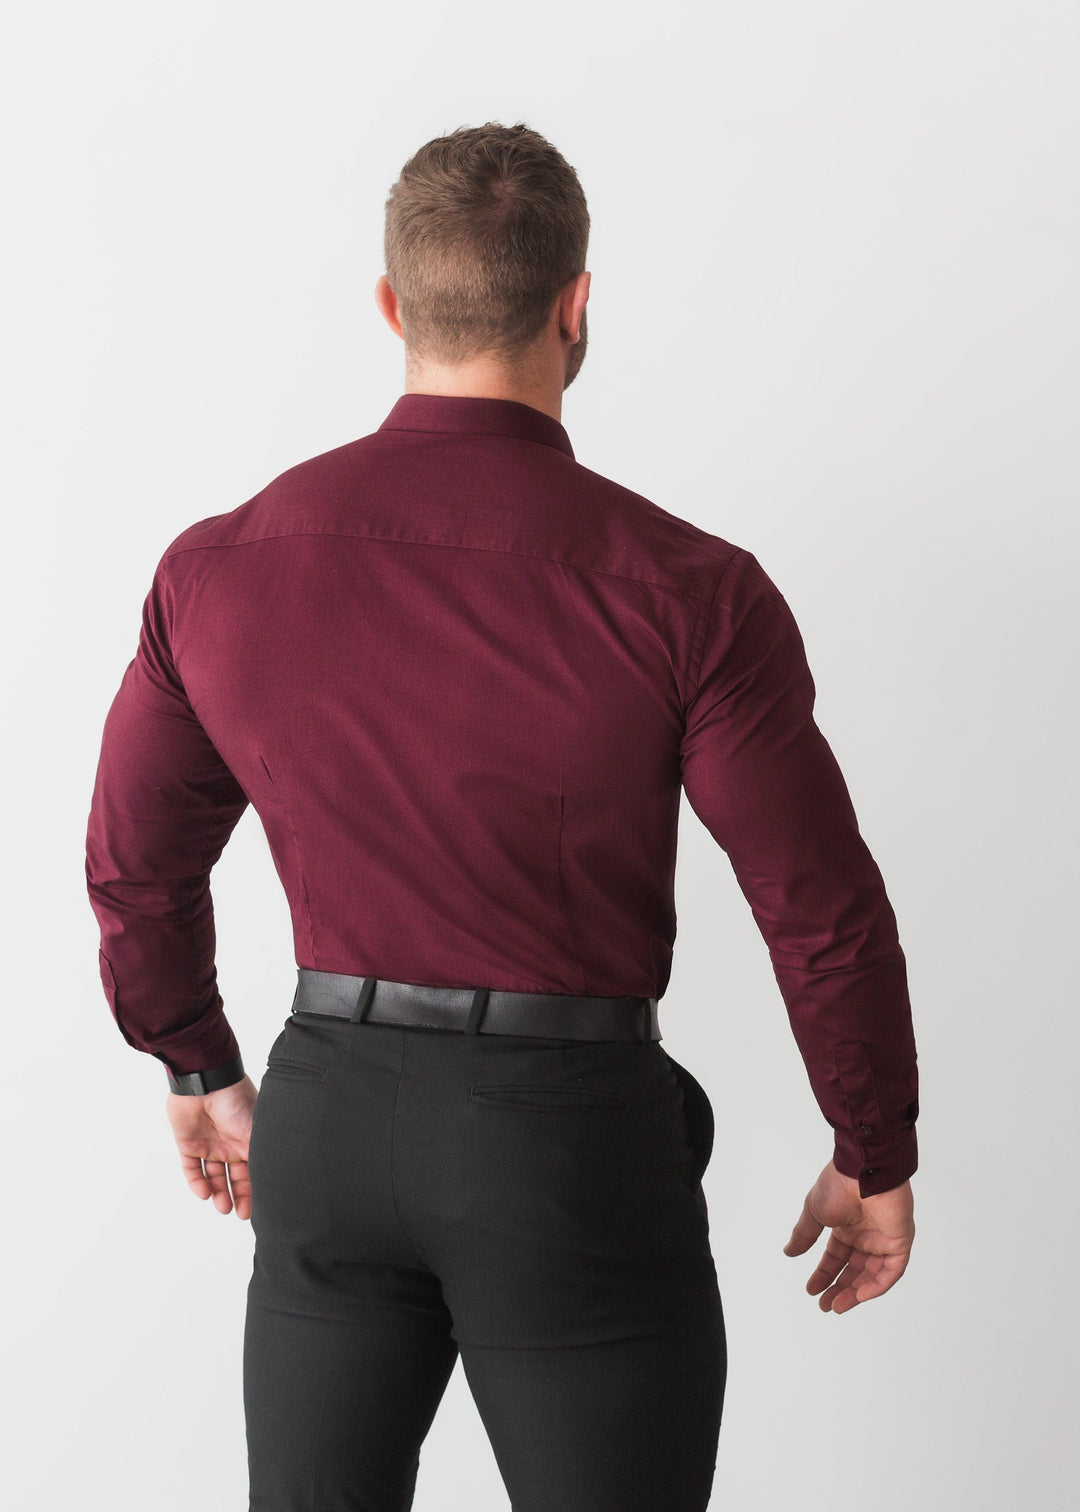 Burgundy V Tapered Fit Shirt. A Proportionally Fitted and Comfortable Muscle Fit Shirt. Ideal for bodybuilders